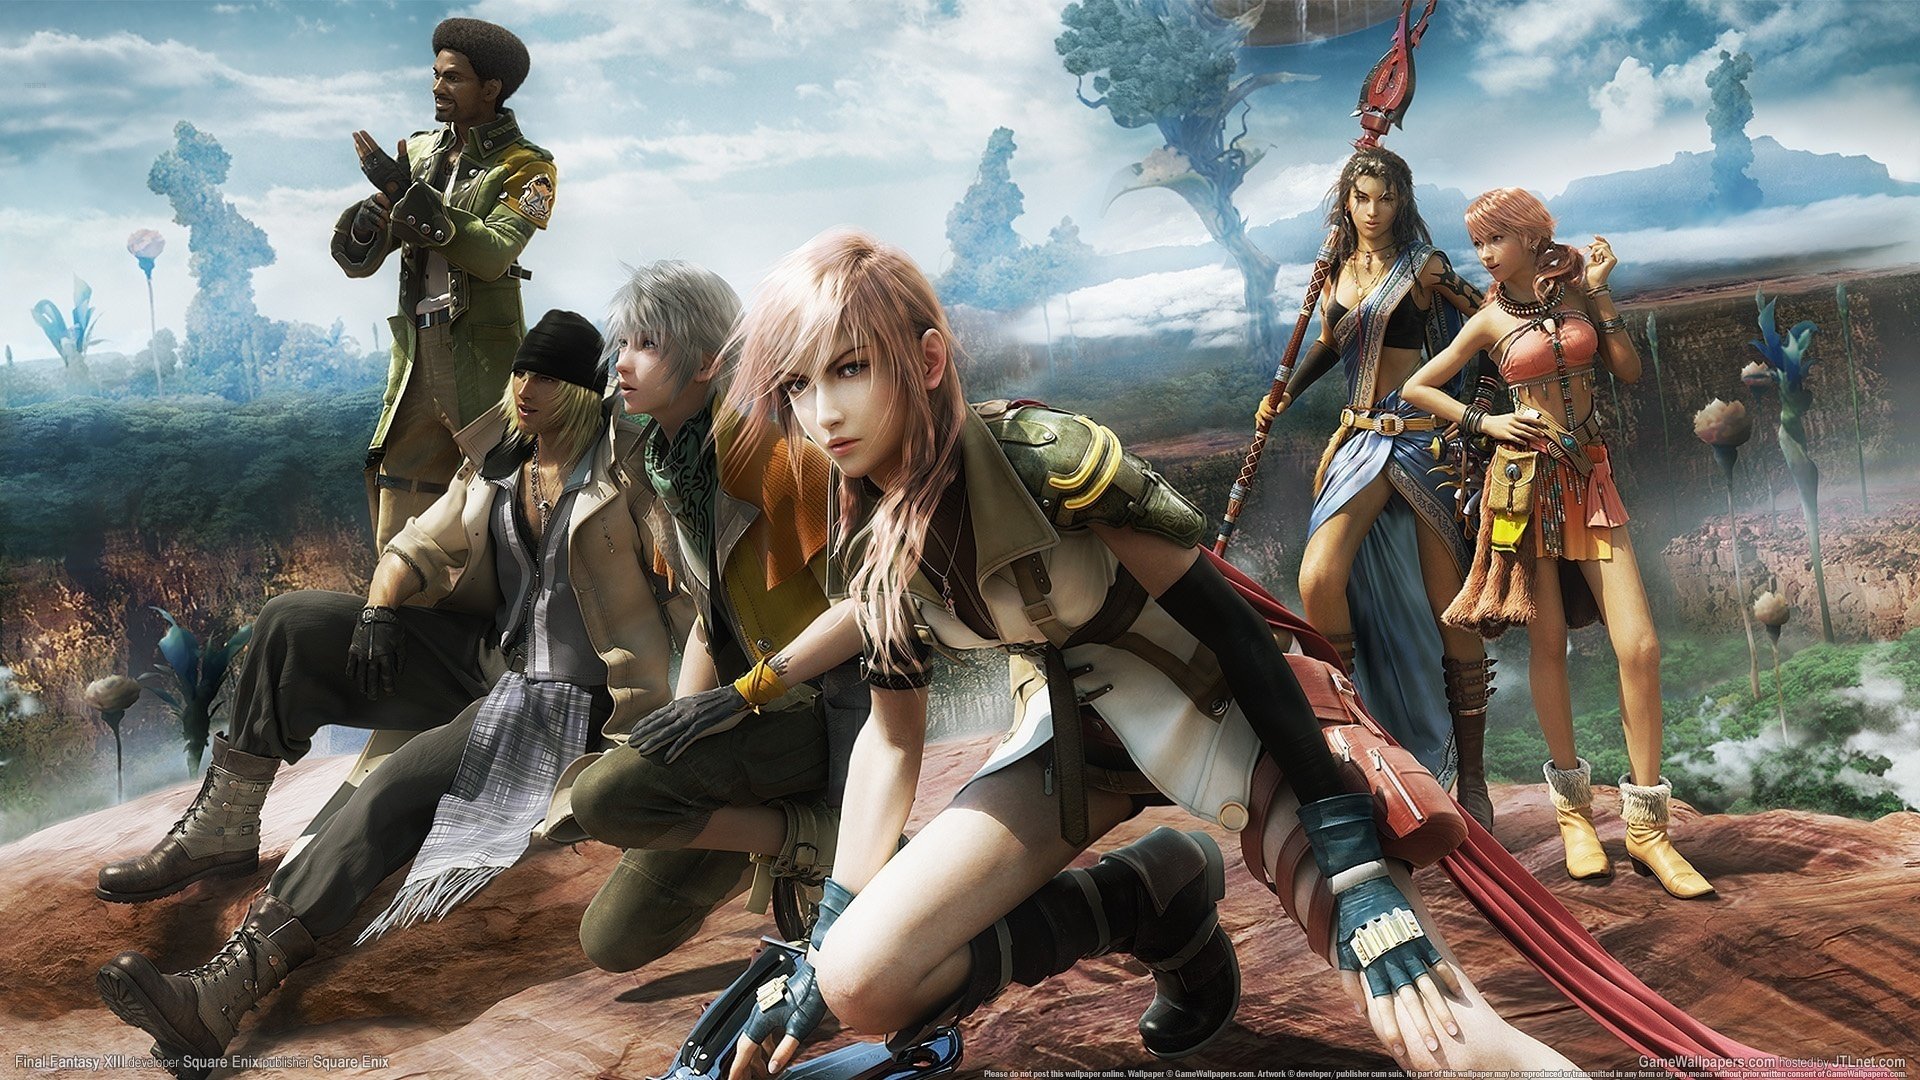 command, Weapons, Friends, The, Sky, Final, Fantasy, Xiii, Trees, Art, Warriors Wallpaper